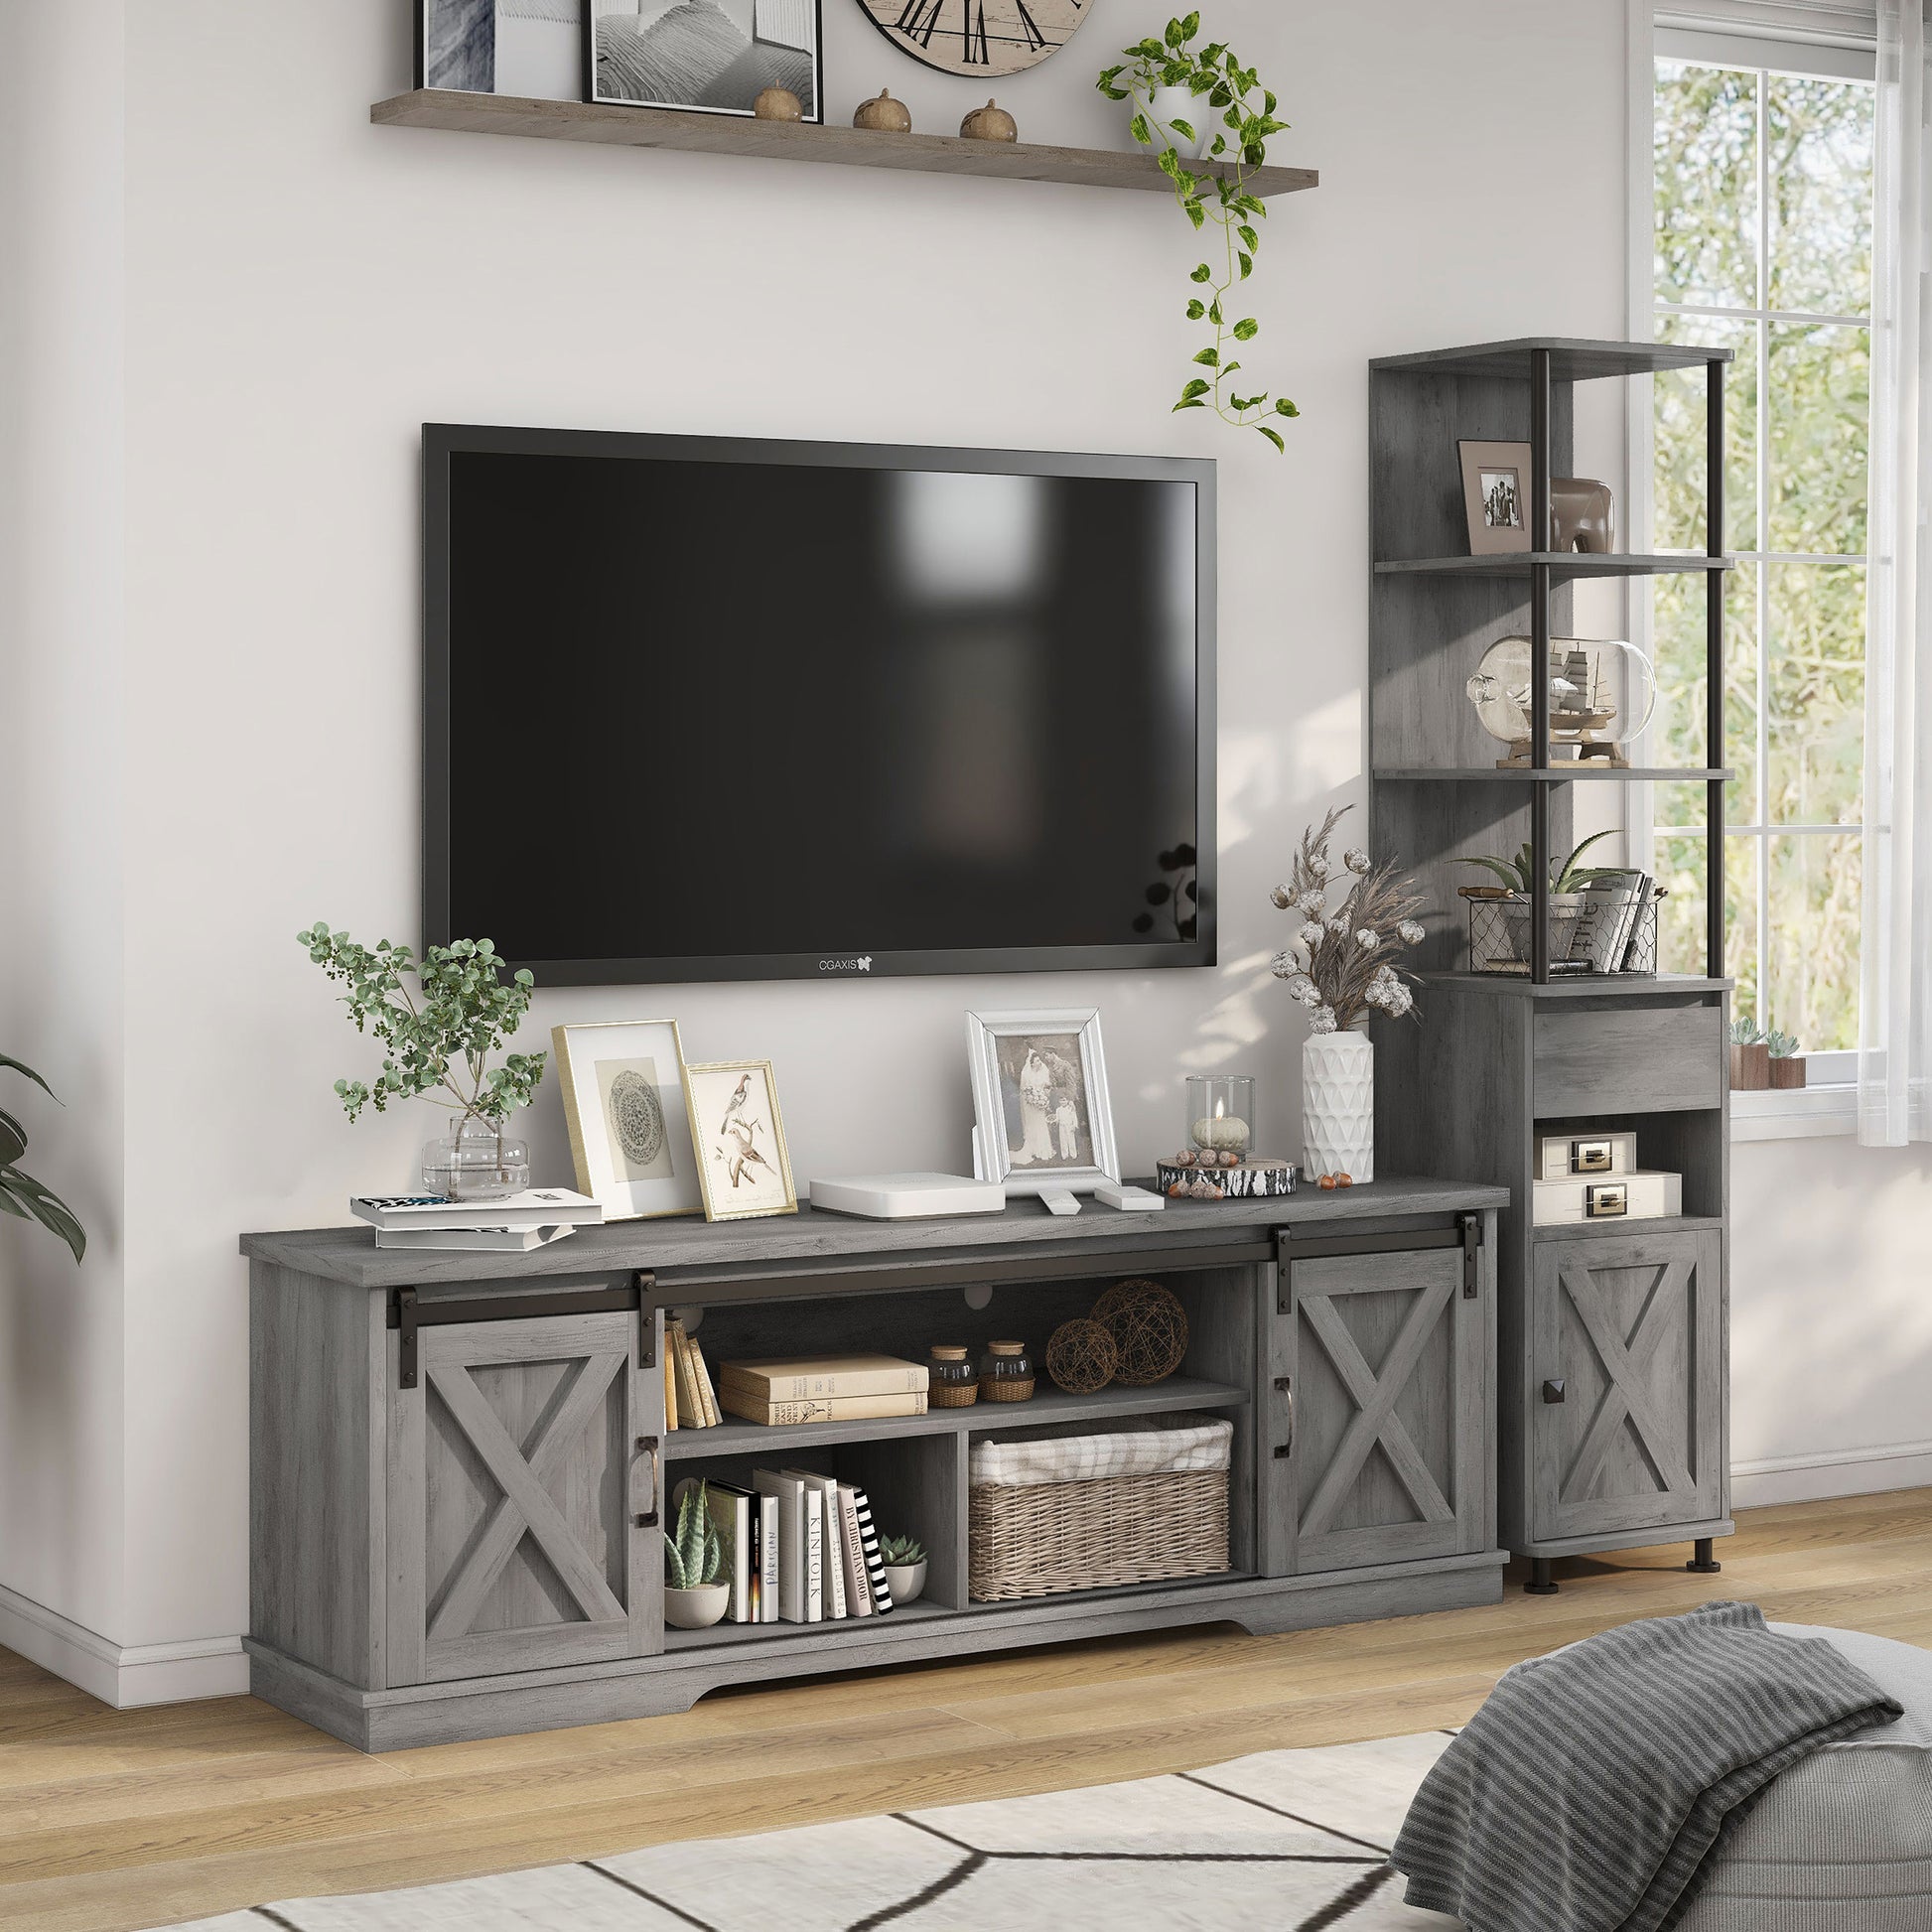 Right angled two-piece rustic vintage gray oak TV stand and pier entertainment set in a living room with accessories